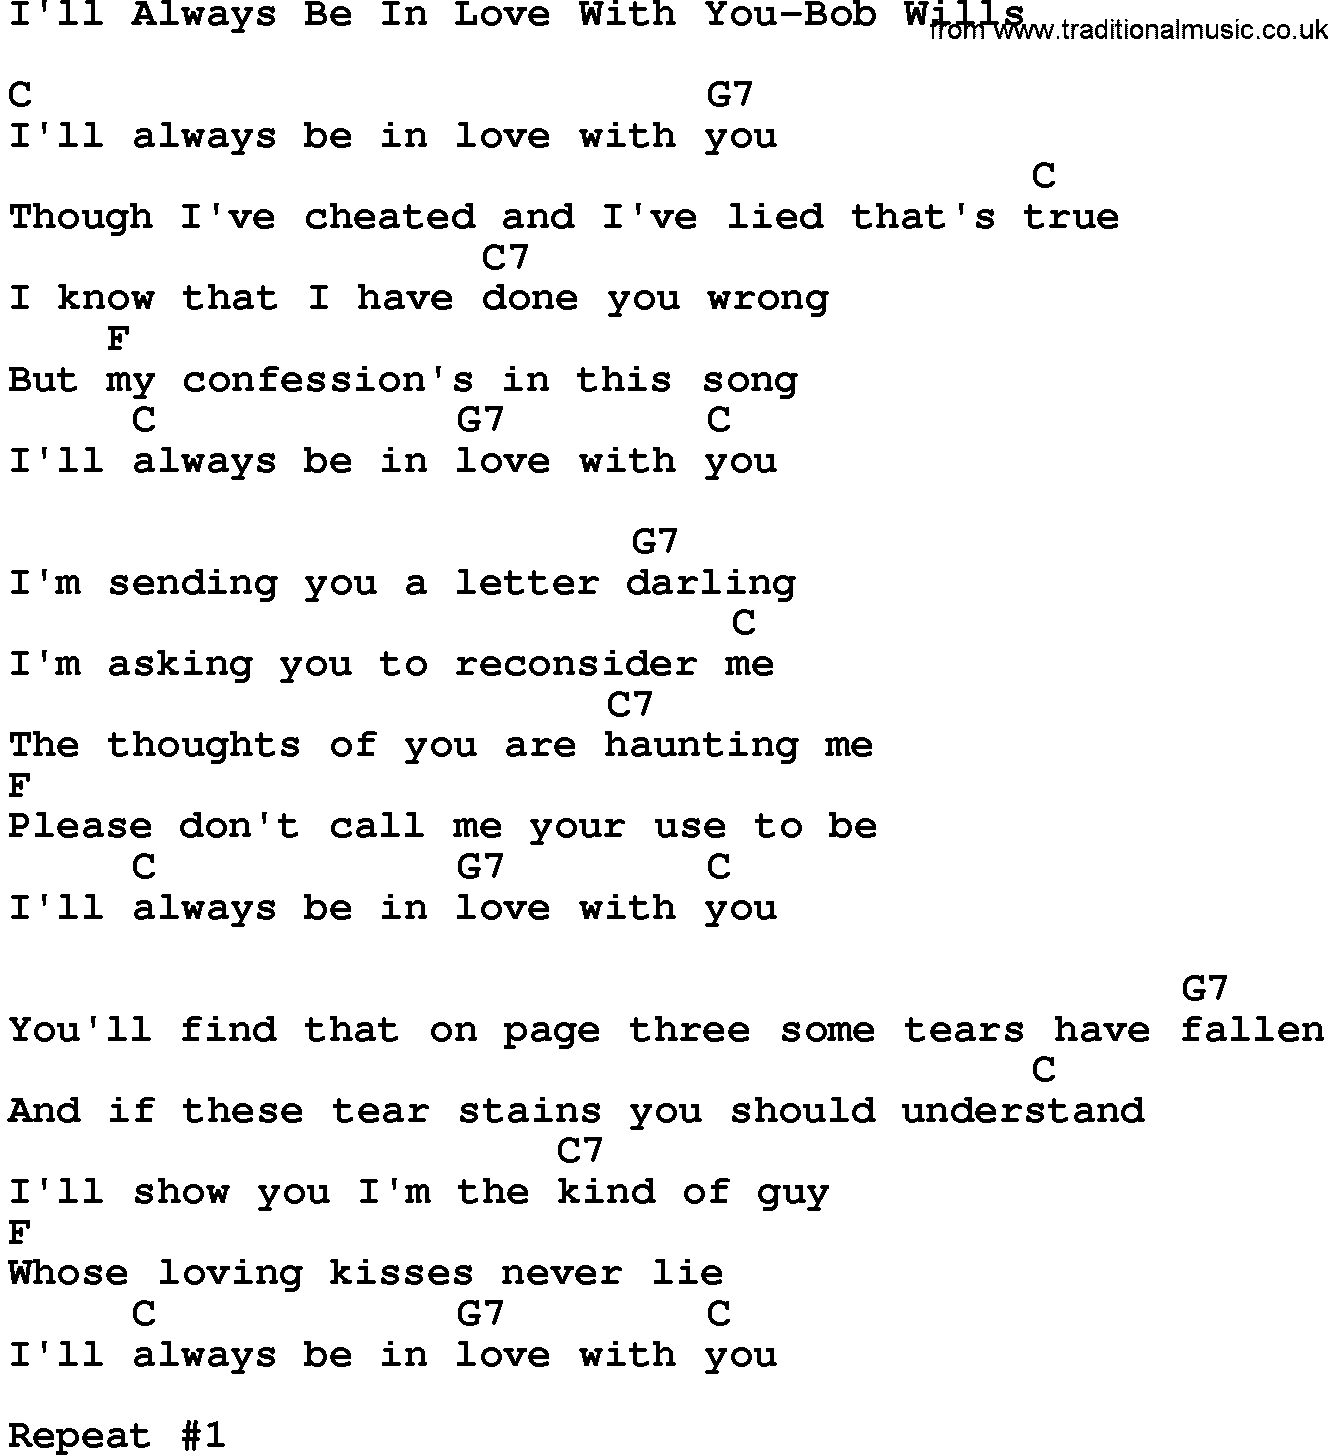 Country music song: I'll Always Be In Love With You-Bob Wills lyrics and chords